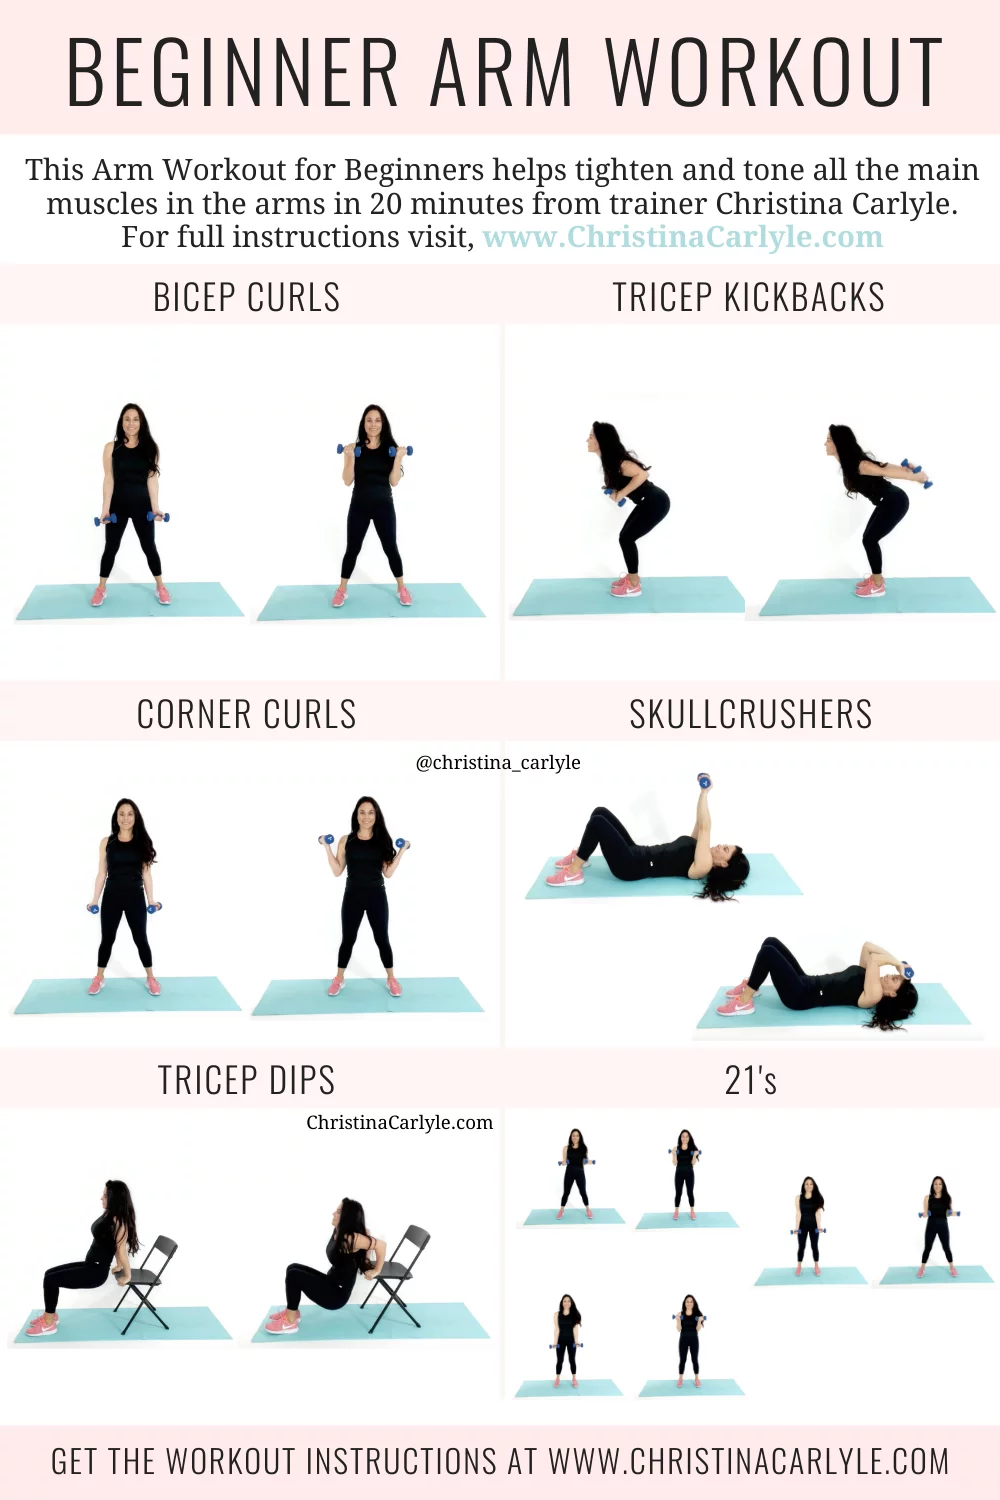 Beginner Arm Workout routine with 6 beginner arm exercises being done by trainer Christina Carlyle